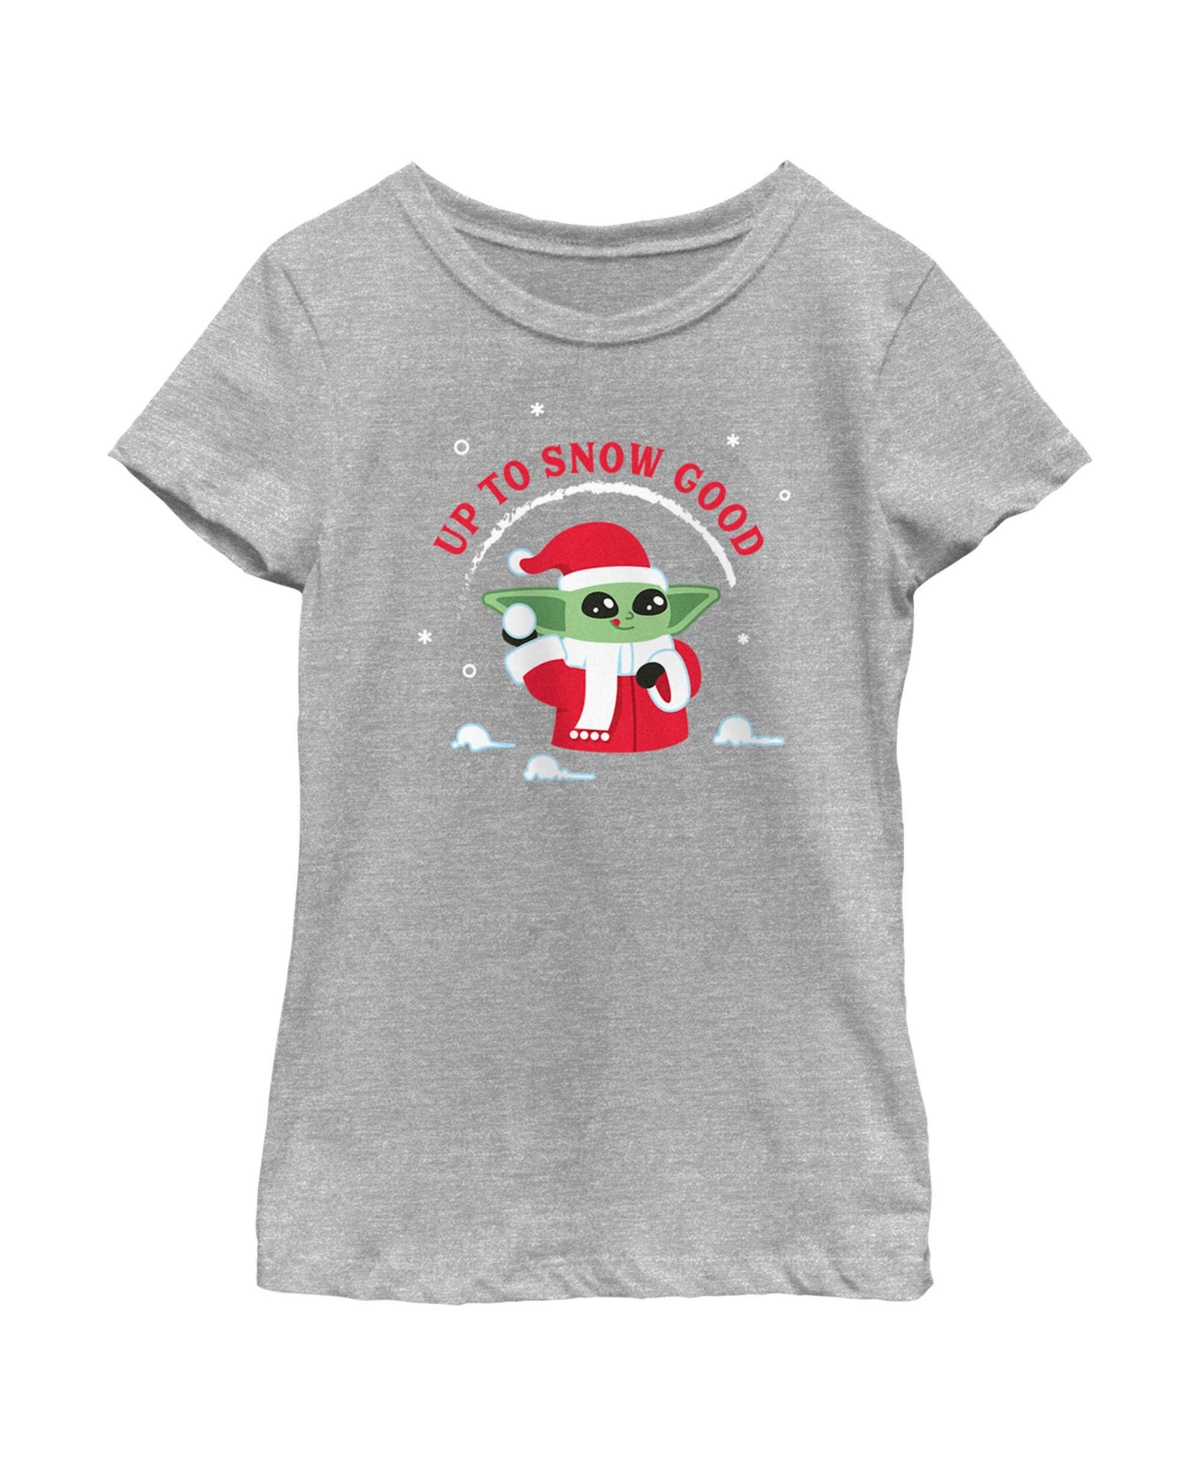 Disney Lucasfilm Girl's Star Wars: The Mandalorian Christmas Grogu Up To Snow Good Child T-shirt In Athletic Heather